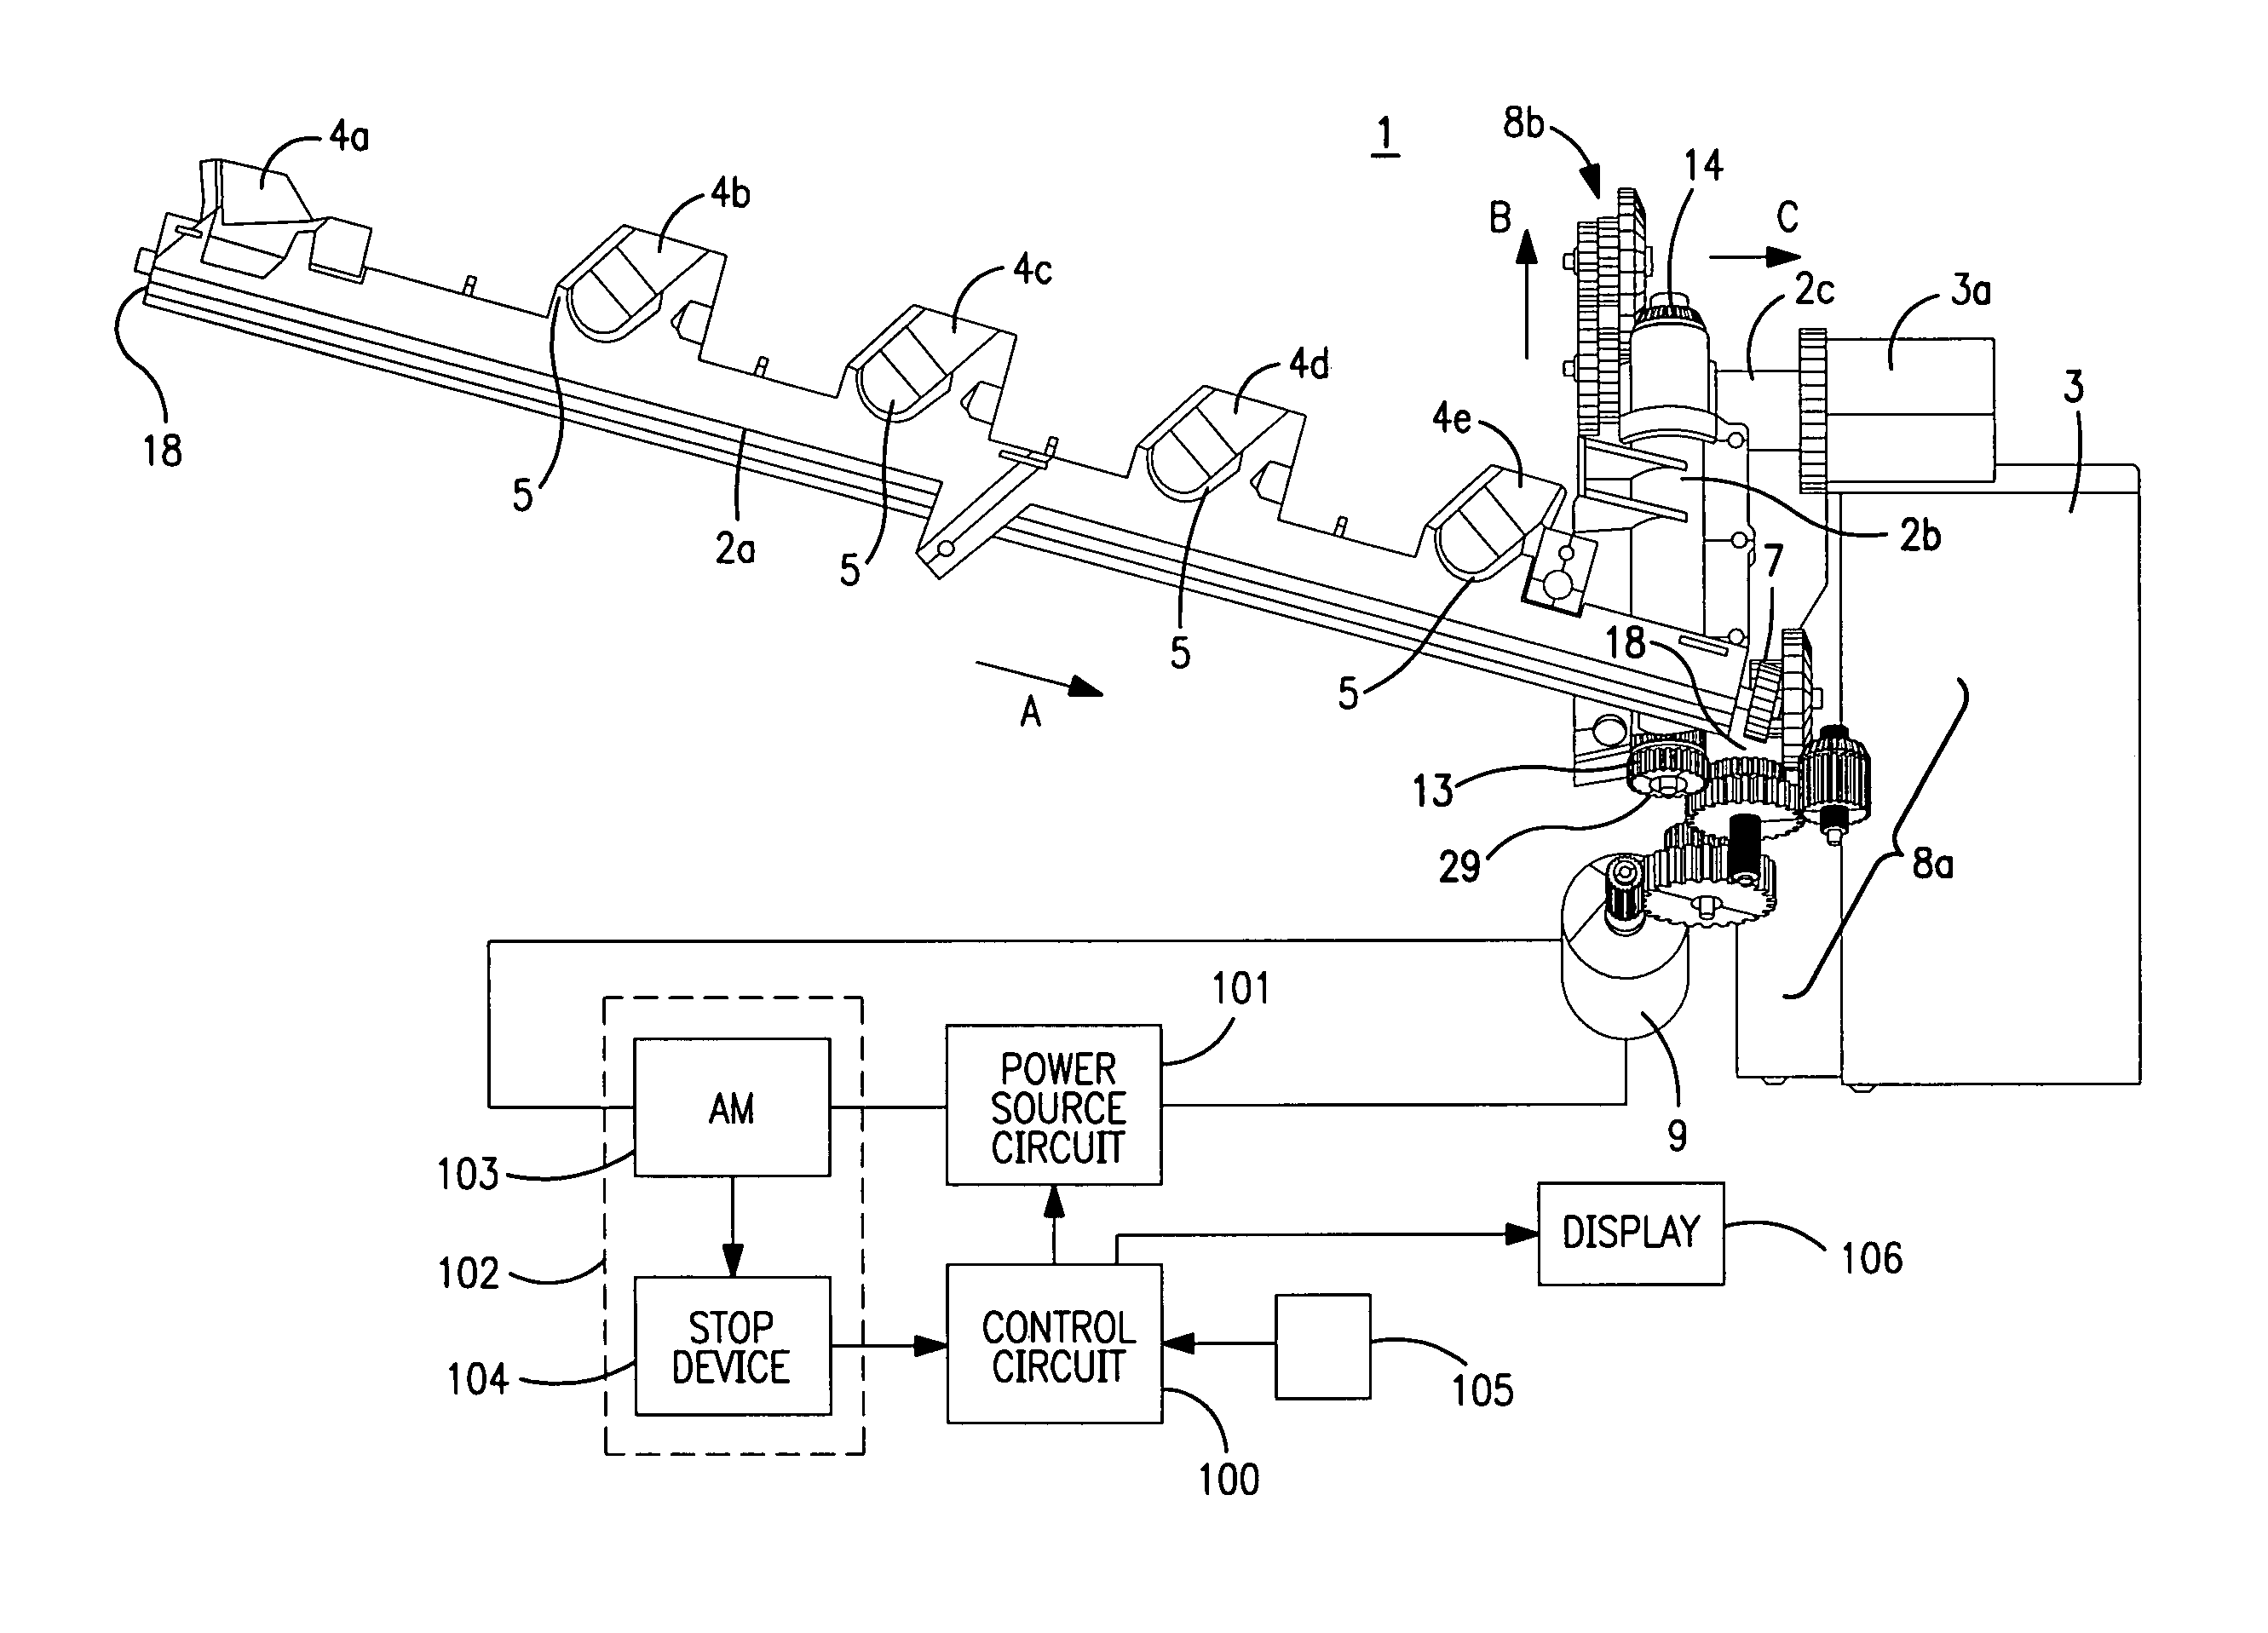 Image forming apparatus featuring upward and downward toner carrying paths